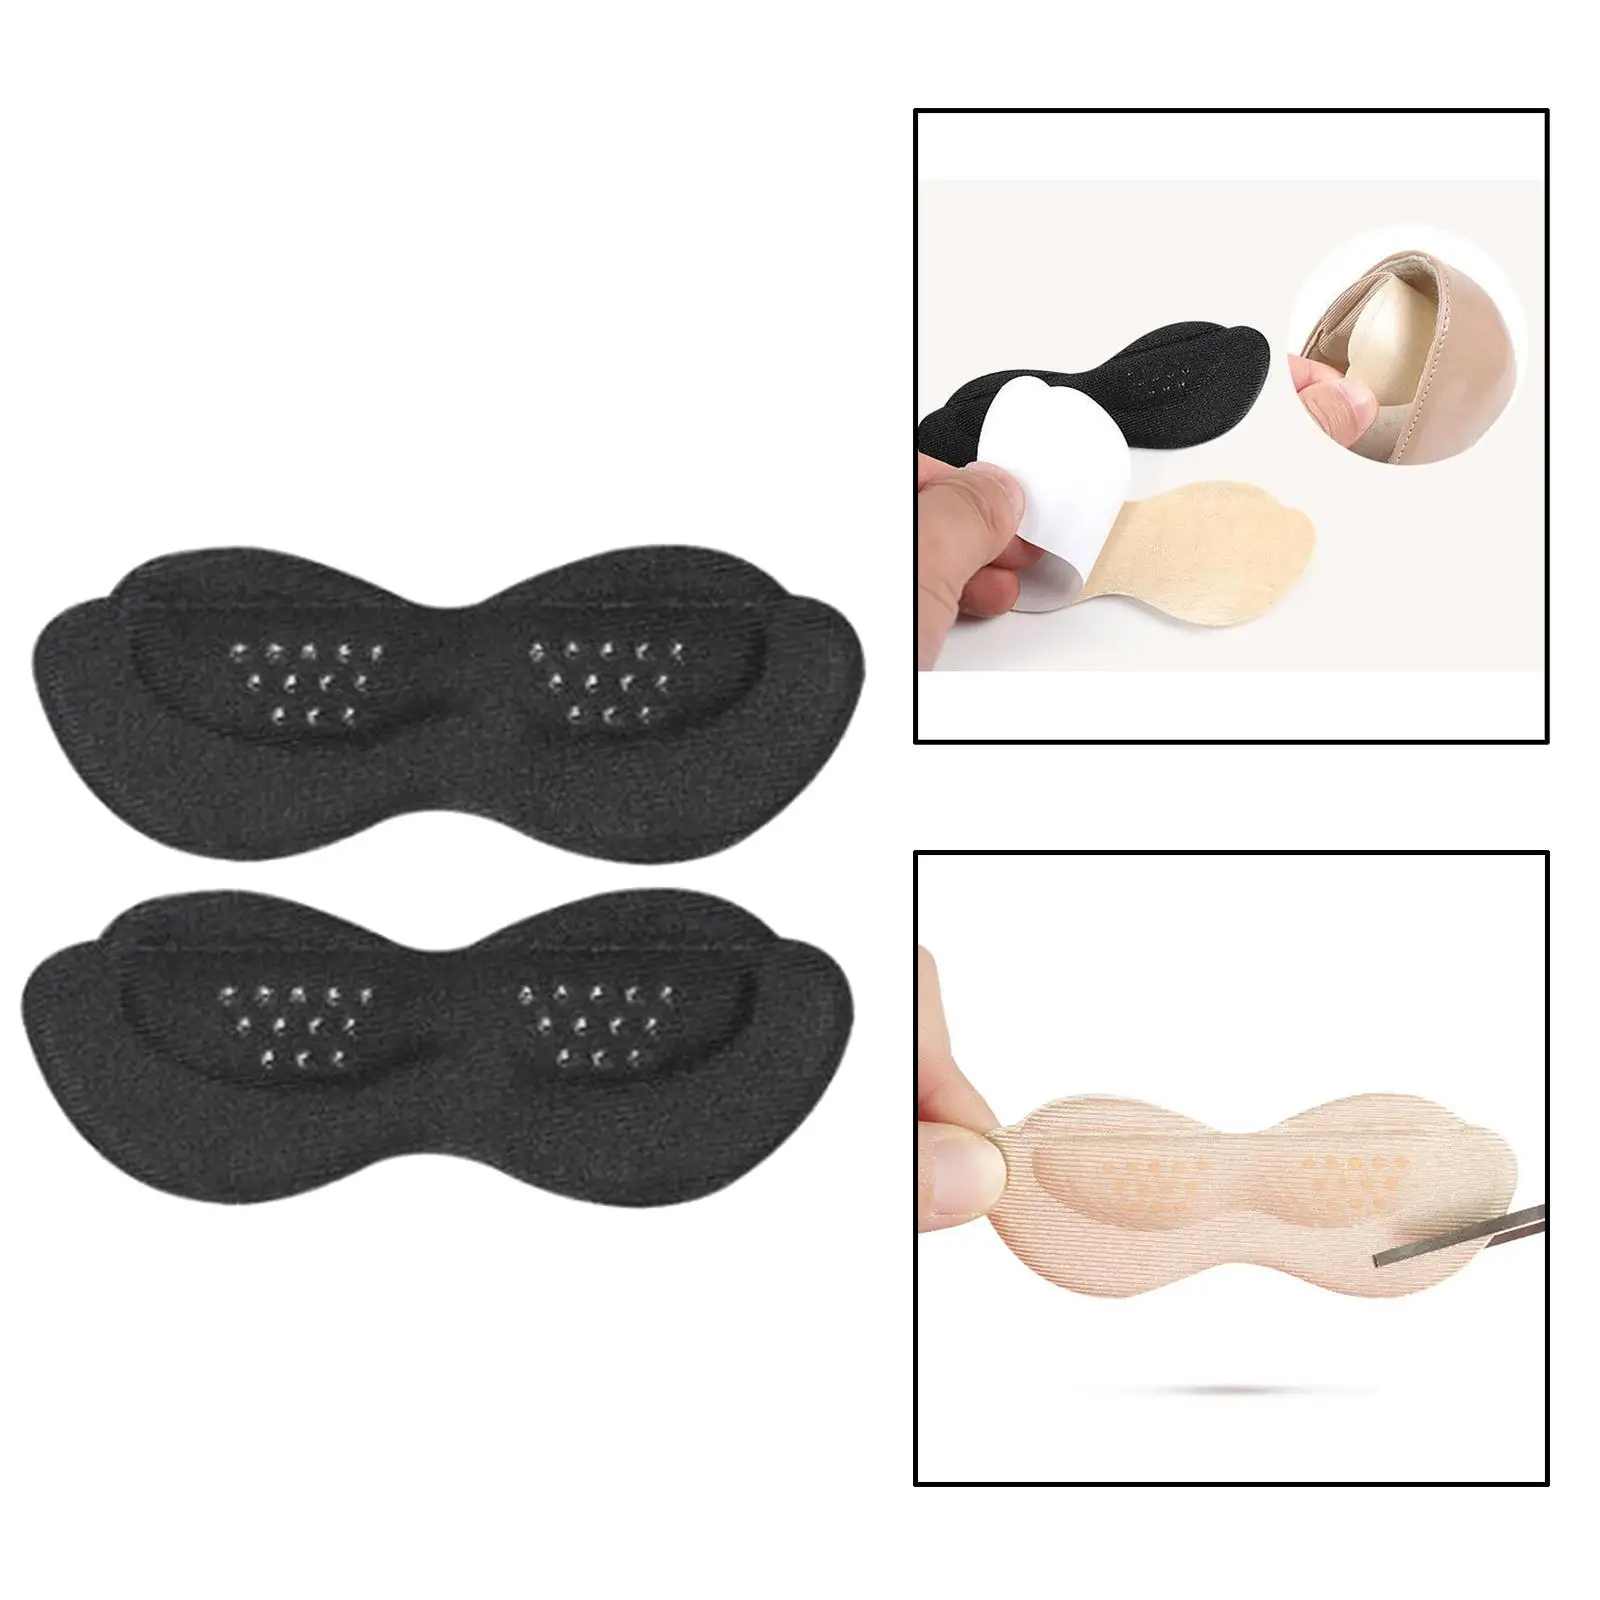 Heel Cushion Pads Anti-Wear Self-Adhesive Cuttable Shoes Insoles for Pain Relieving